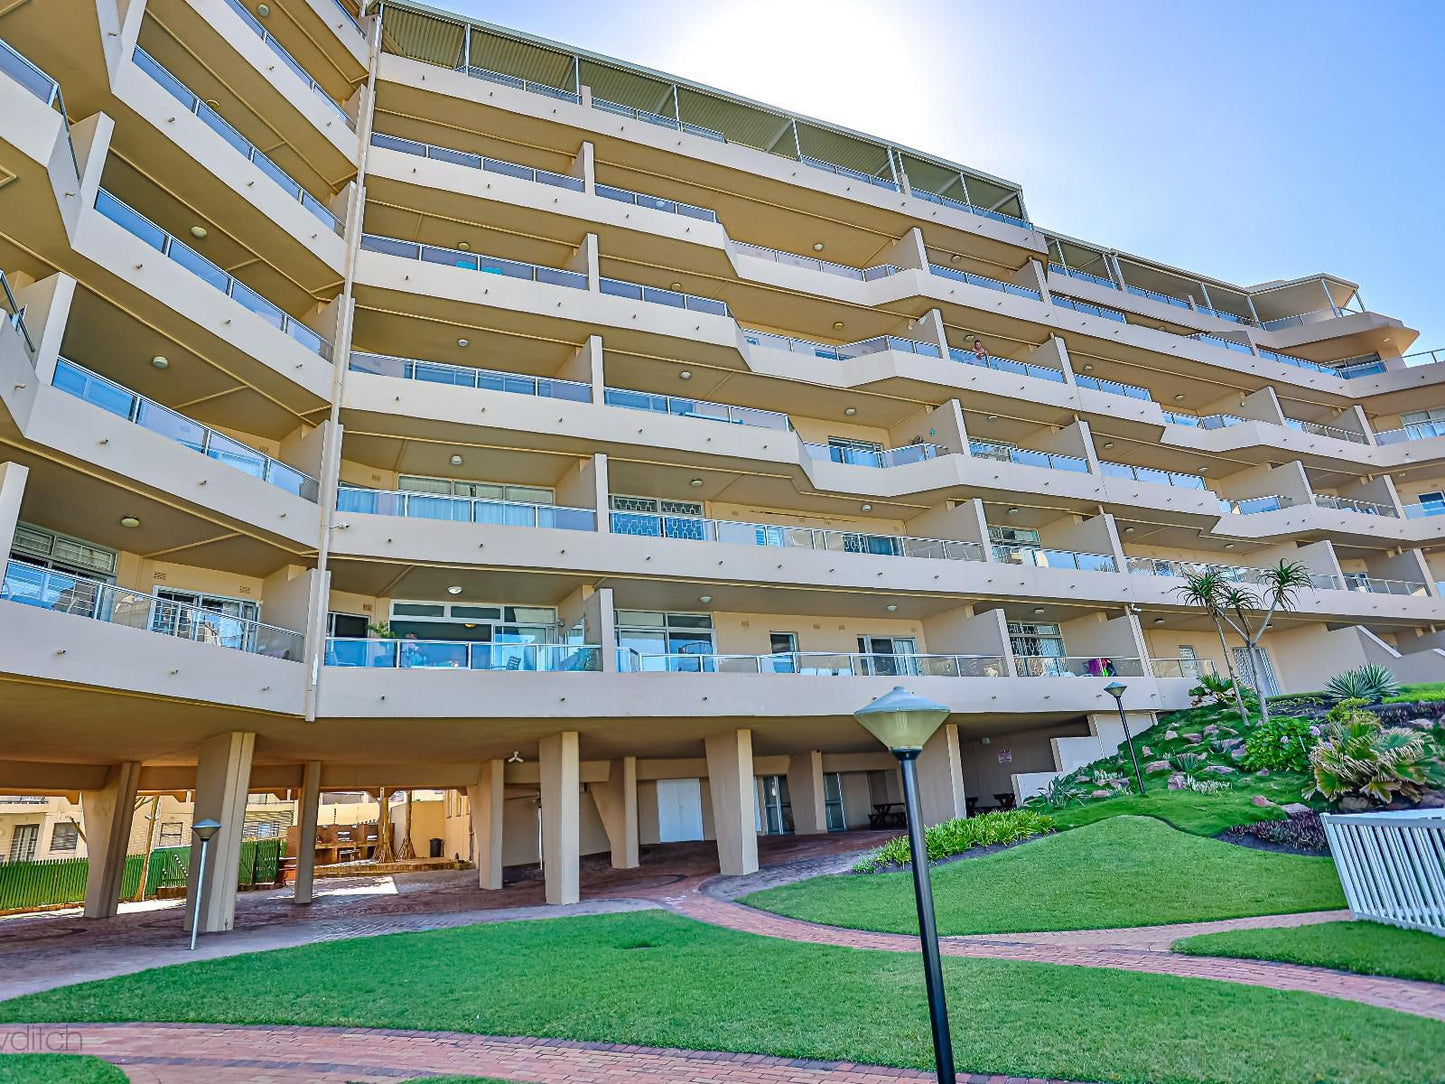 Sands Affordable Luxury On The Beach Ballito Kwazulu Natal South Africa Complementary Colors, Balcony, Architecture